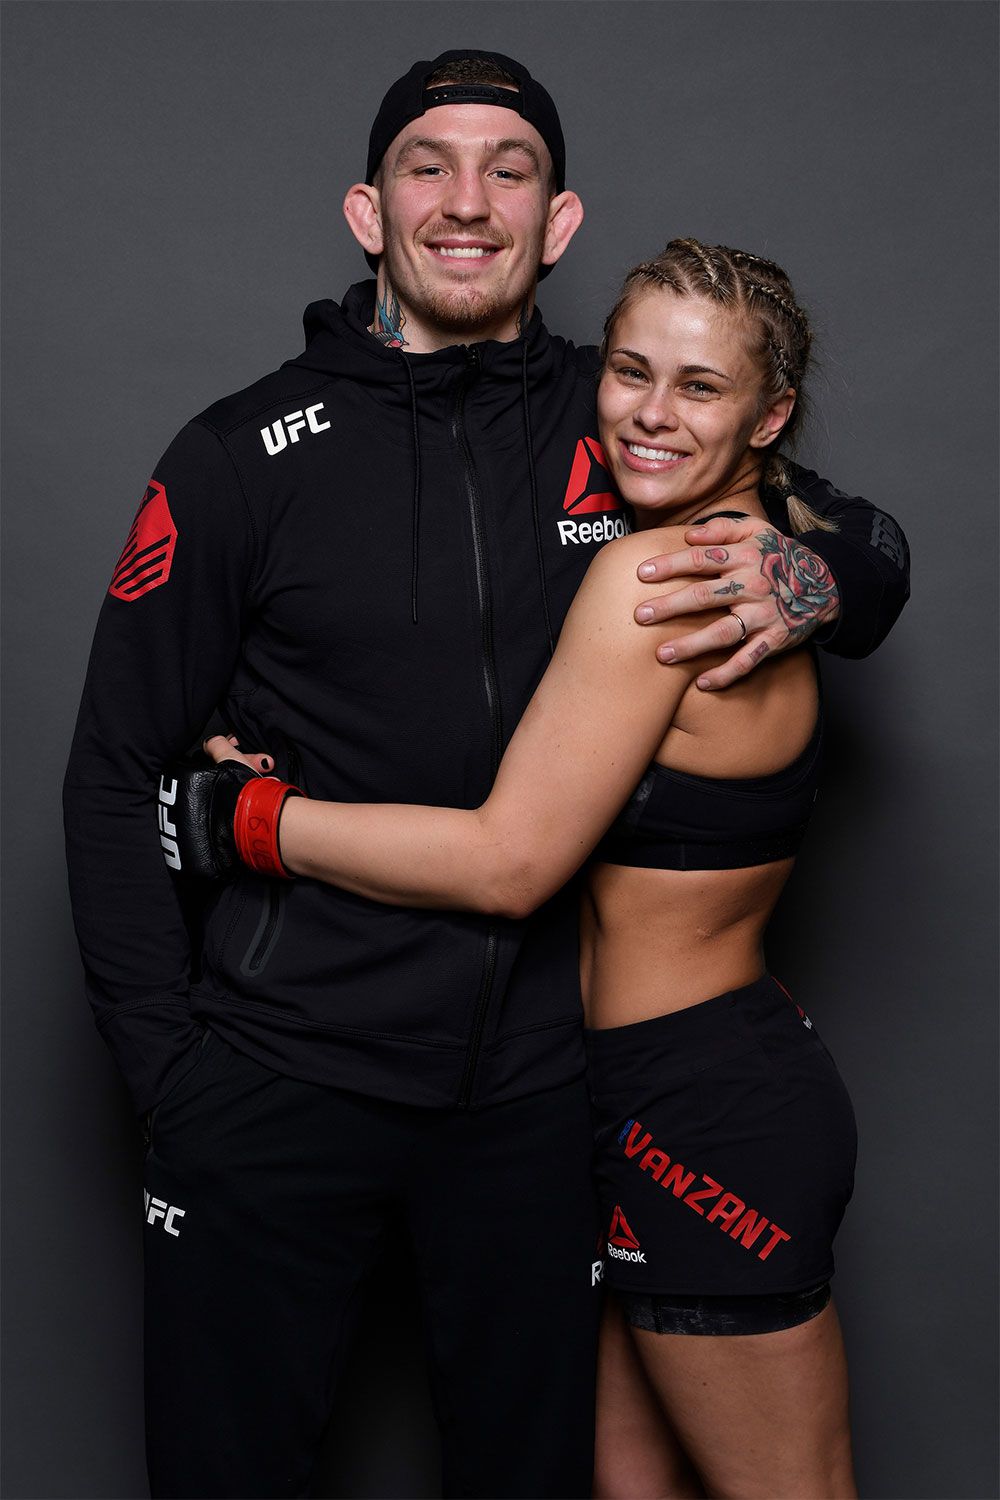 Paige Vanzant Husband: Is She Married To Austin Vanderford? A Look Into Their Relationship Life